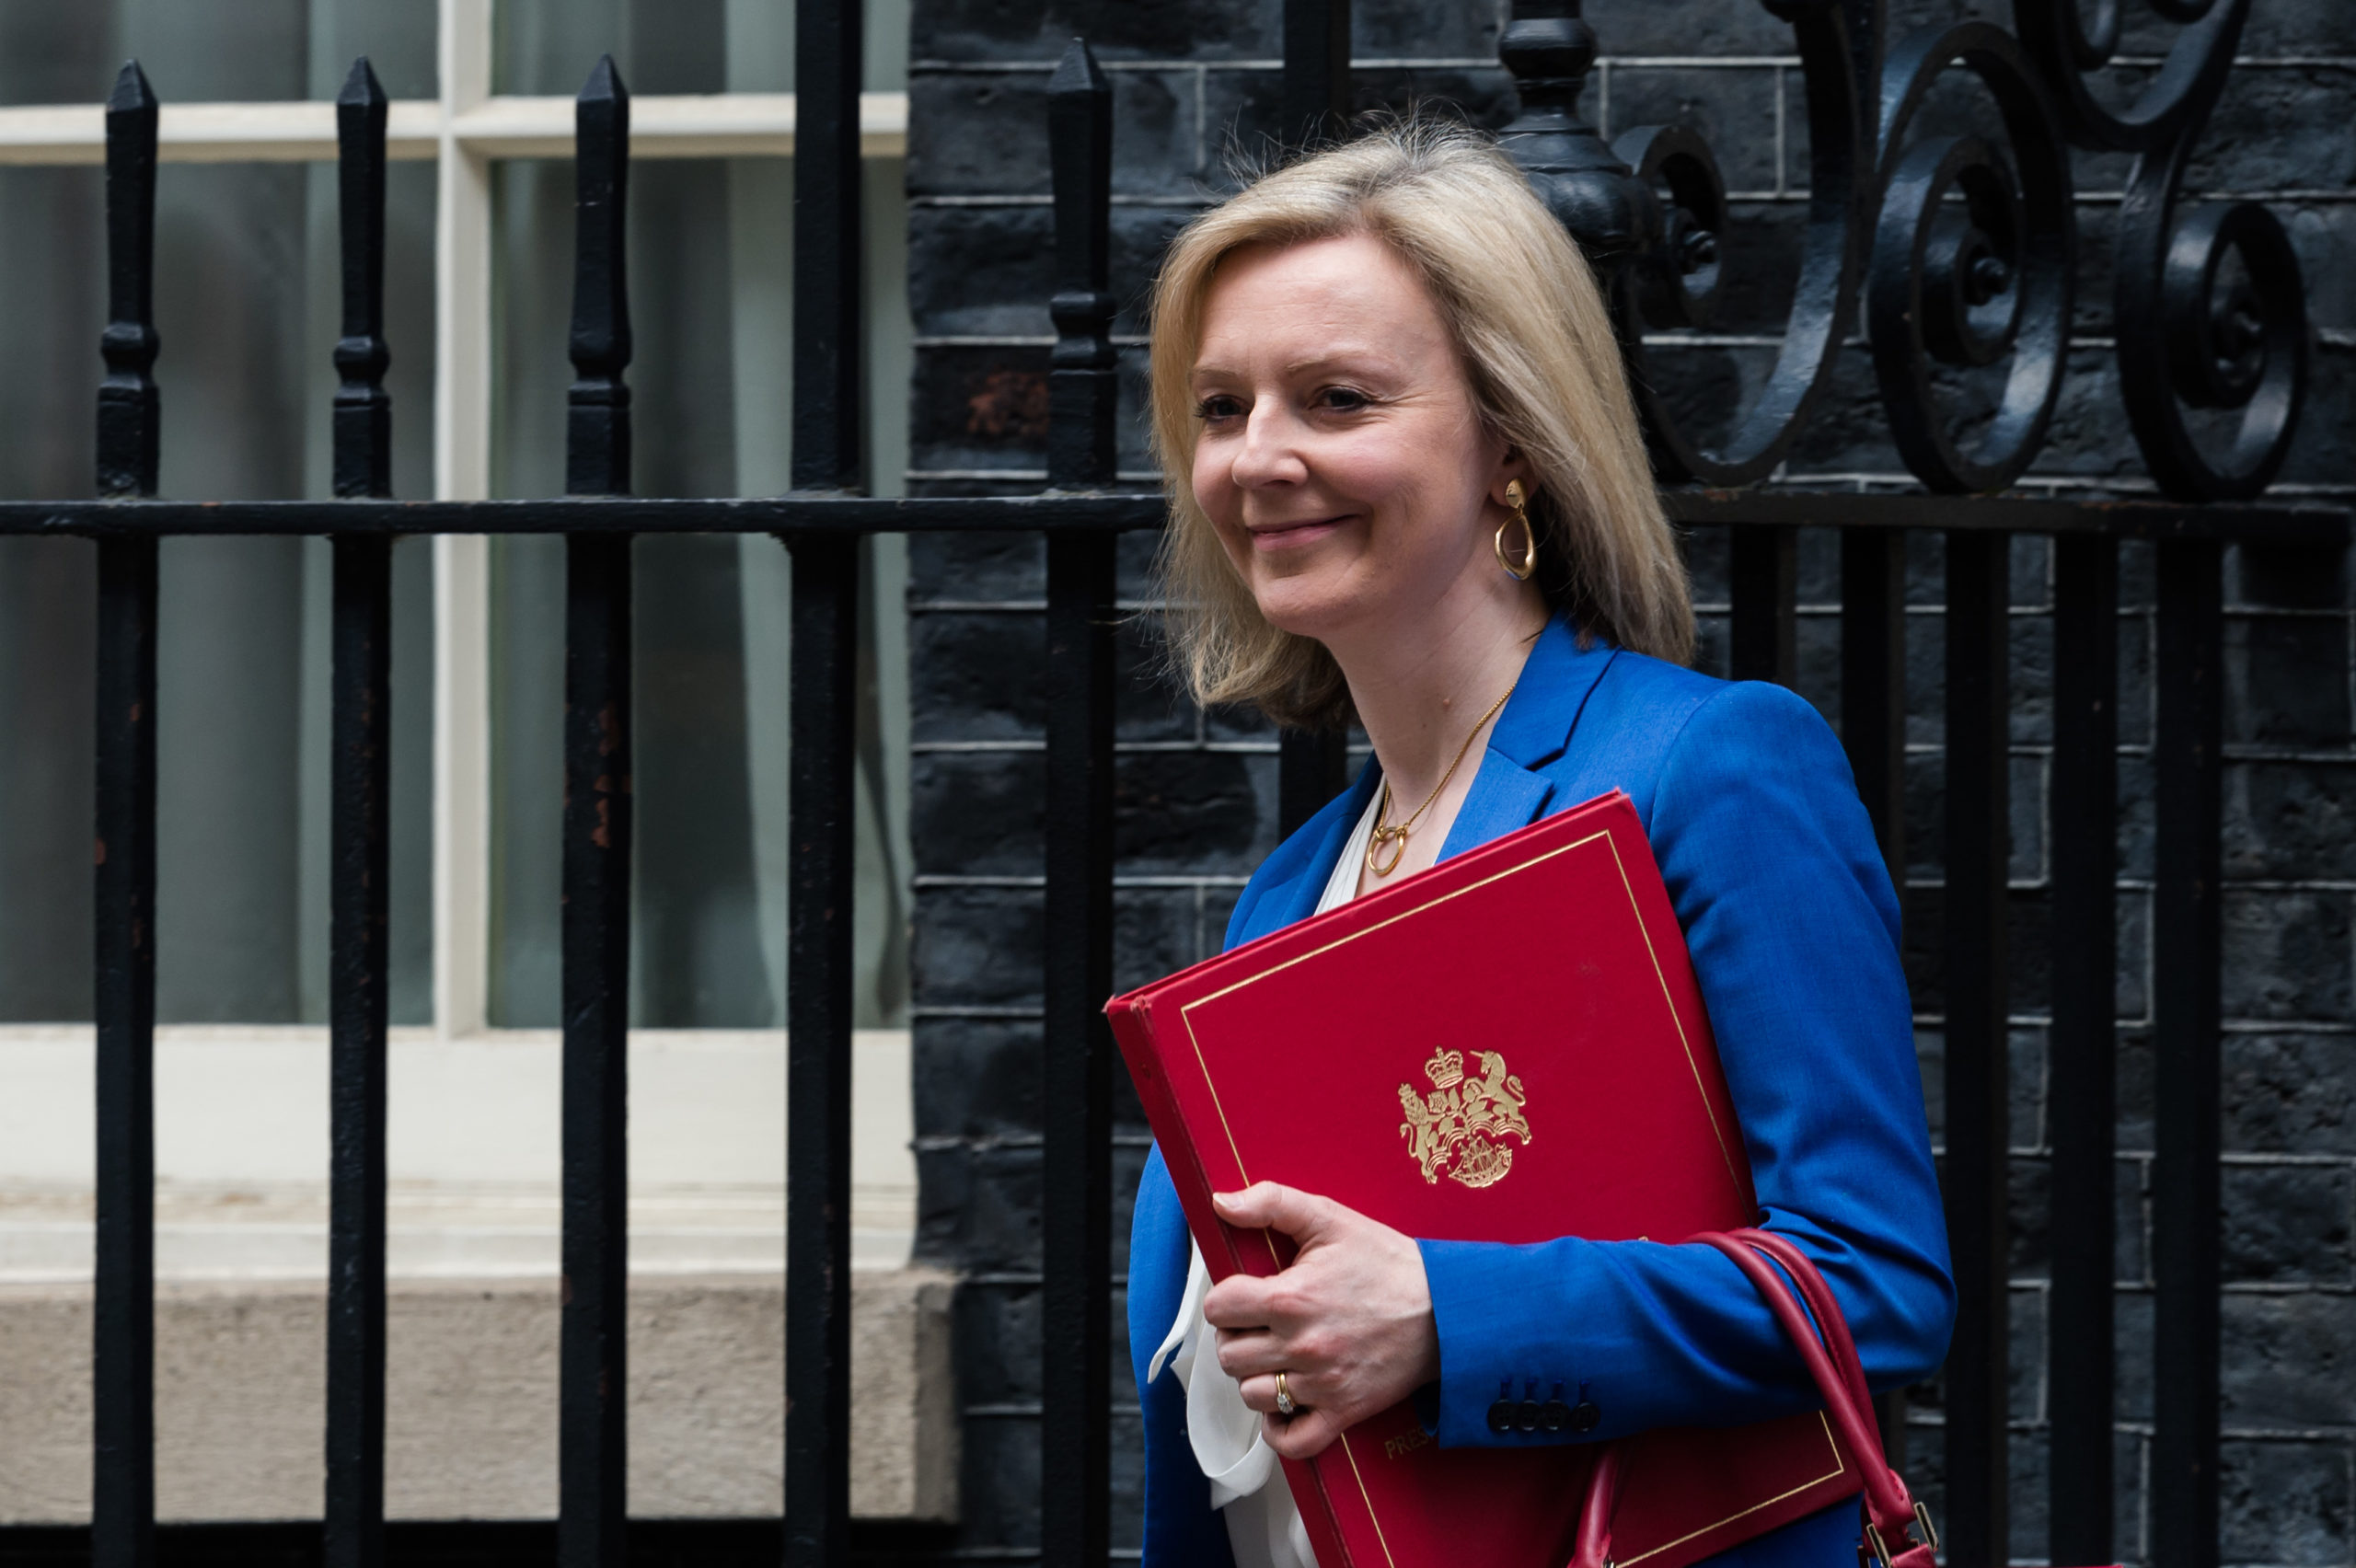 The petition calls on Minister for Women and Equalities Liz Truss to continue with GRA reform